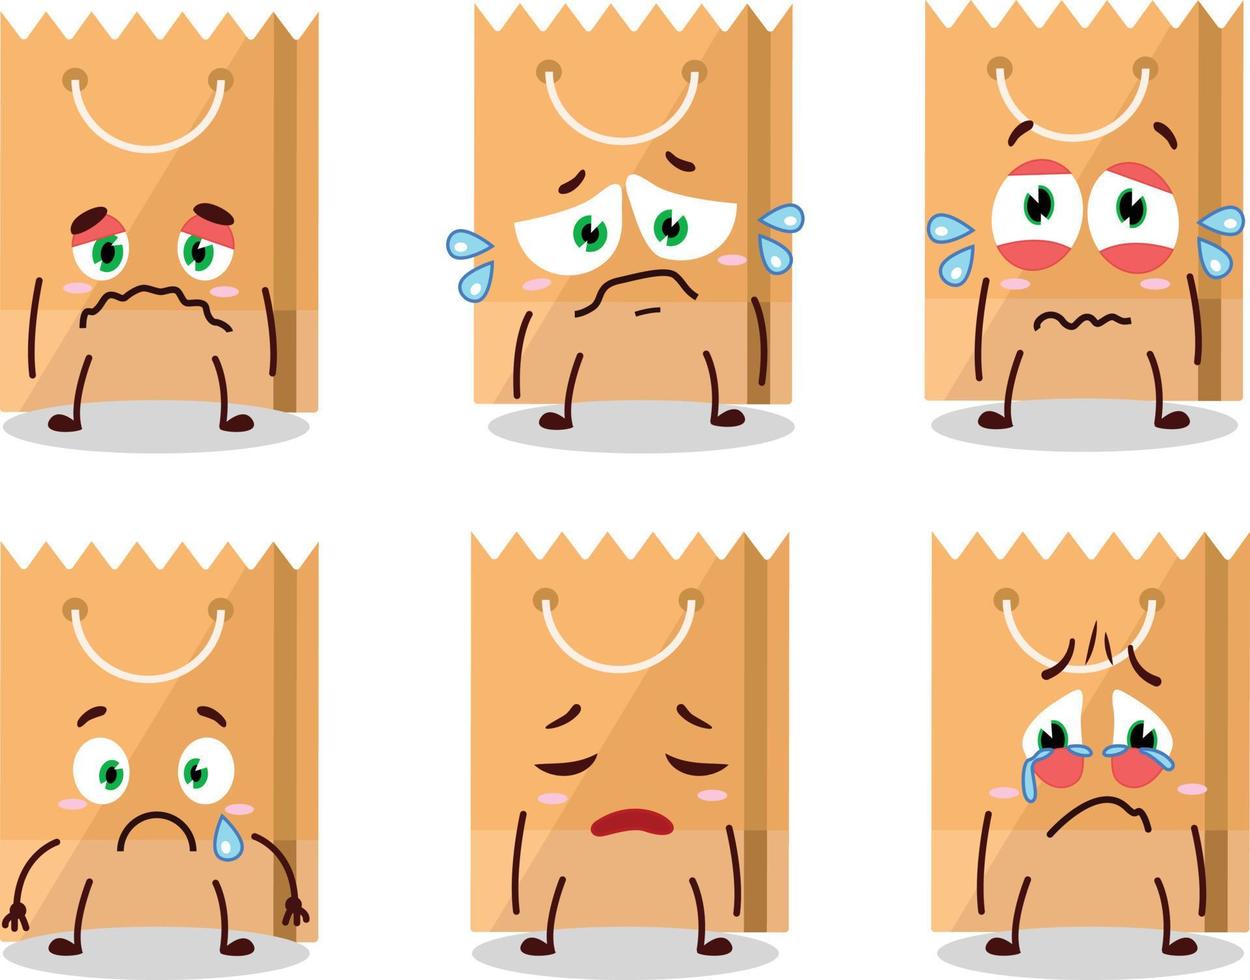 Grocery bag cartoon character with sad expression vector